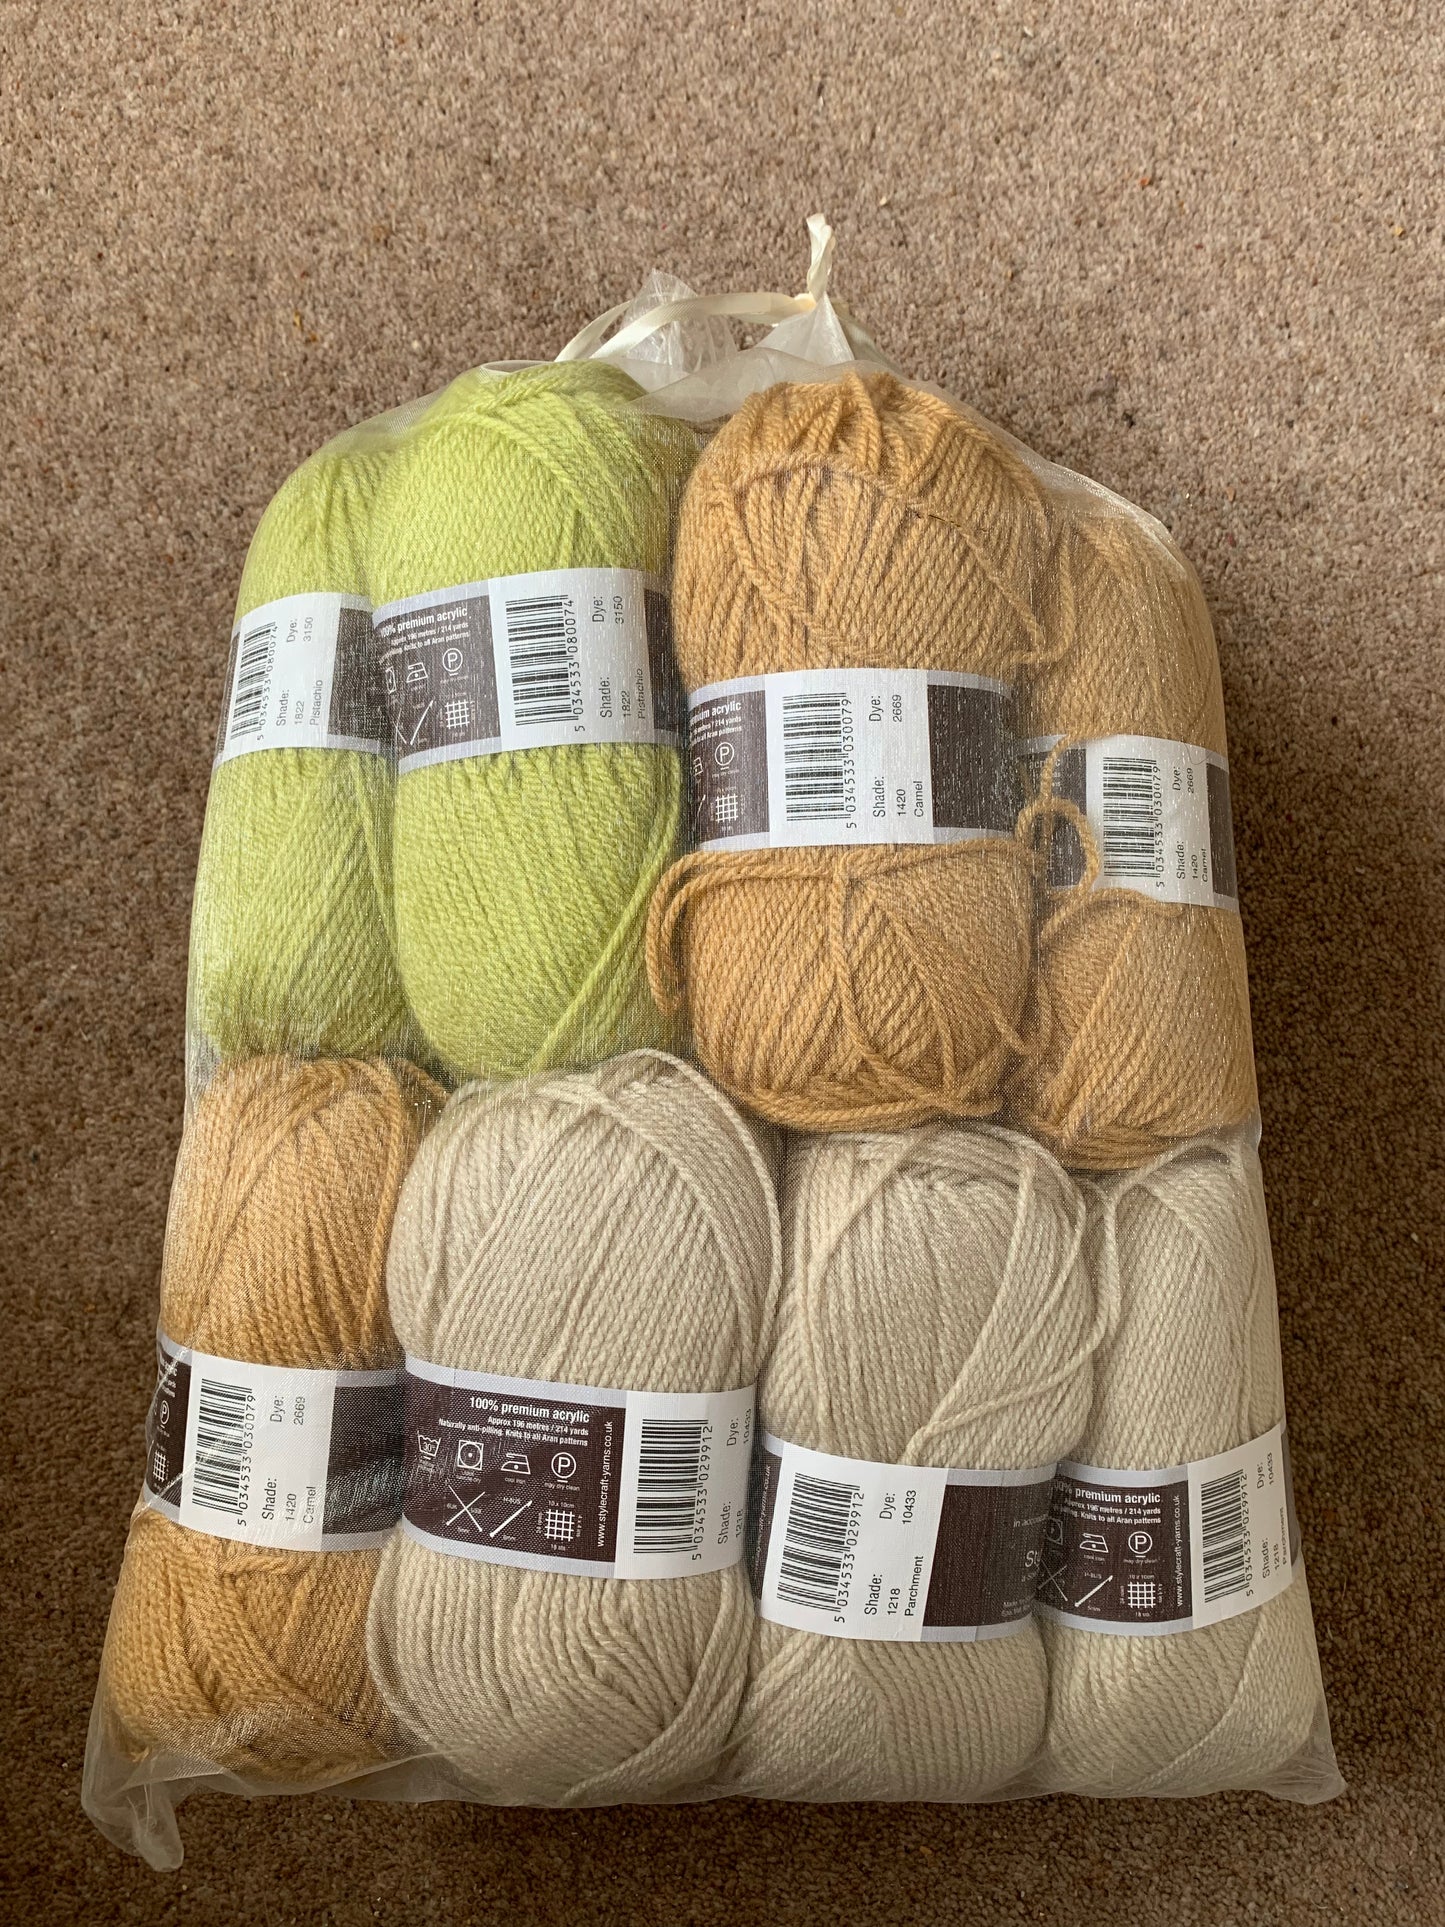 Cablemagoria Knit Along - Meadow